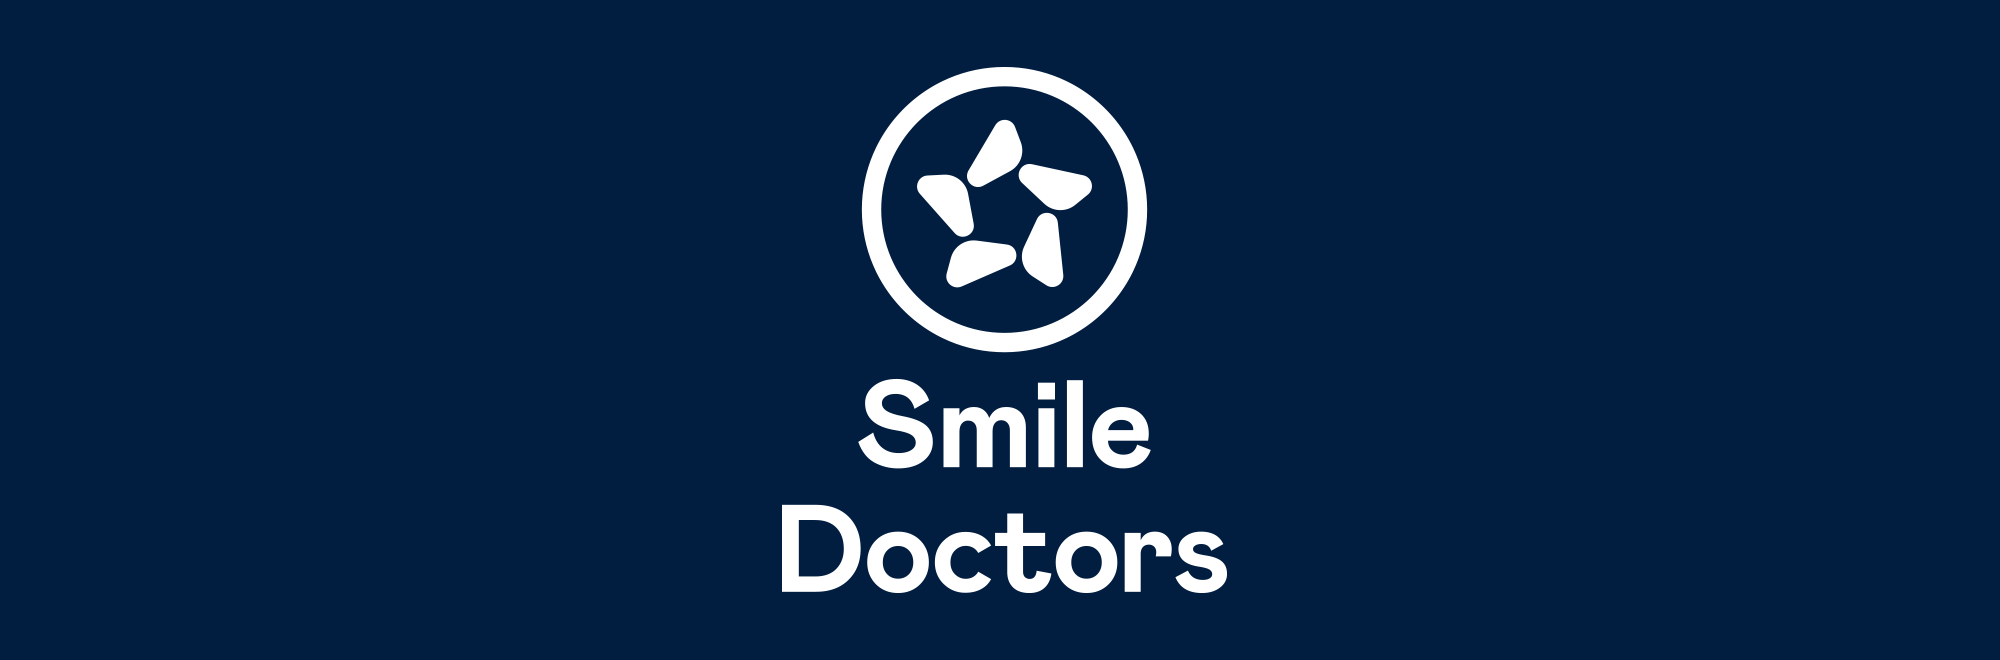 Smile Doctors Chooses CureMint to Fuel Procurement Operations for its 350+ Locations